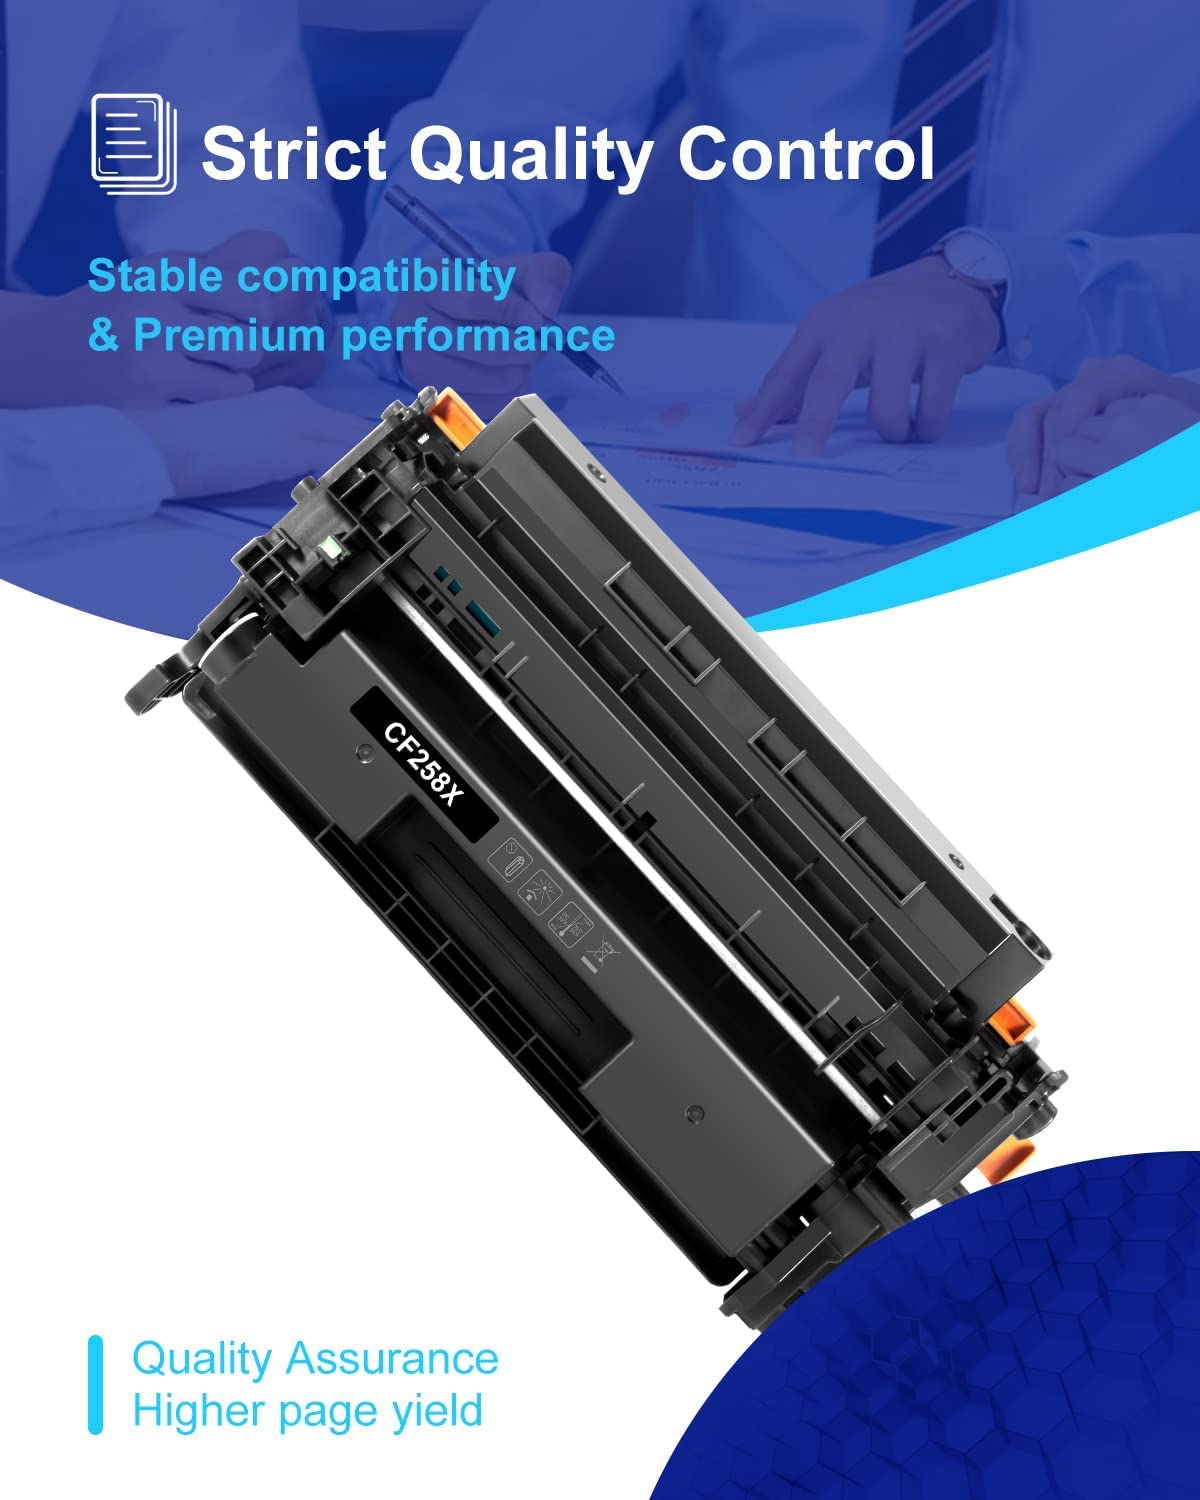 INUDIO Compatible Toner Cartridge Replacement for HP 58X CF258X 58A CF258A Toner Cartridge to Use with HP Laserjet Pro M404n M404dn M404dw MFP M428fdw M428dw M428fdn Printer(Black,2 Pack)